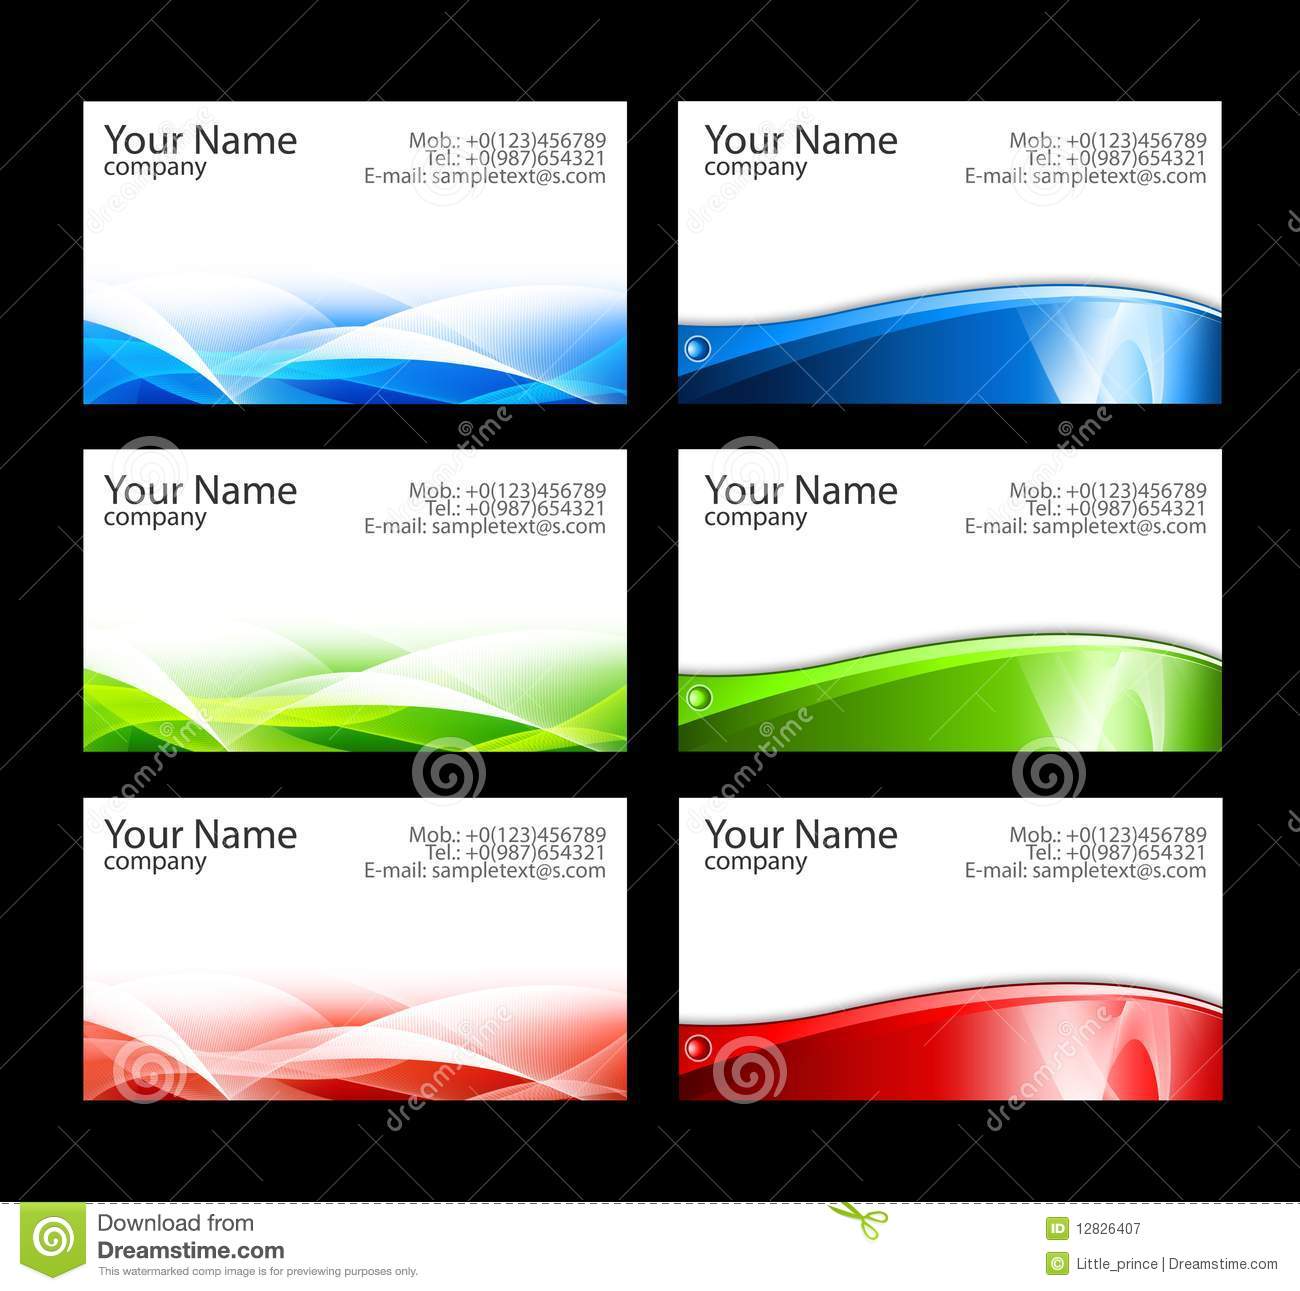 microsoft business card template free download